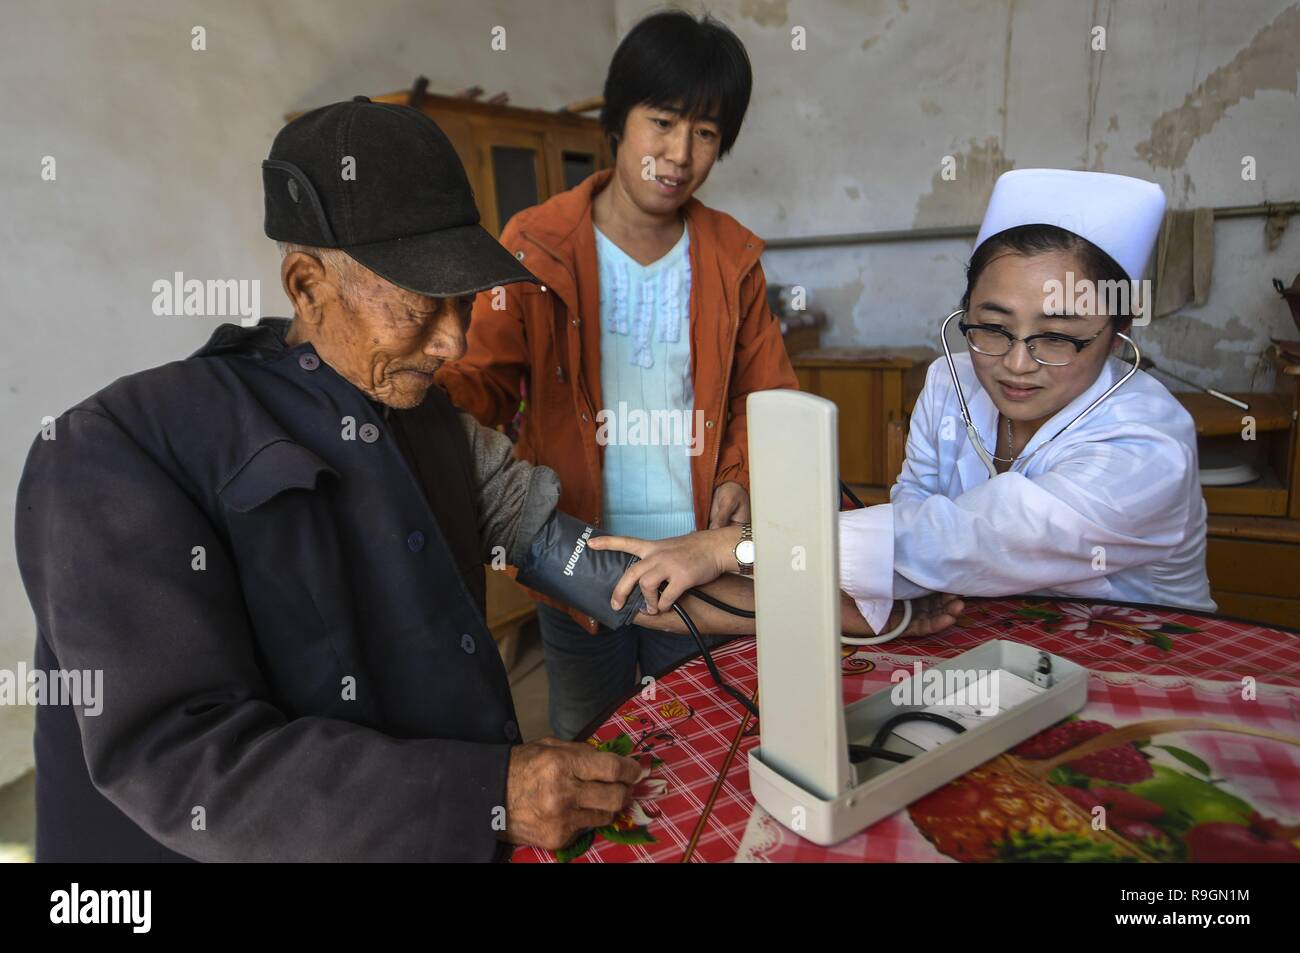 (181225) -- BEIJING, Dec. 25, 2018 (Xinhua) -- A nurse checks the blood pressure for a resident at Nanma Village in Gucheng County, north China's Hebei Province, Oct. 29, 2017. The Chinese government spent 5.95 trillion yuan (about 862 billion U.S. dollars) on medical services from 2013 to 2017, with an average annual increase of 11.7 percent, according to a report submitted to National People's Congress, China's top legislature. China's fiscal spending on medical services in 2017 was 1.4 trillion yuan, a 55.5-percent increase from 2013, accounting for 7.1 percent of national fiscal spend Stock Photo